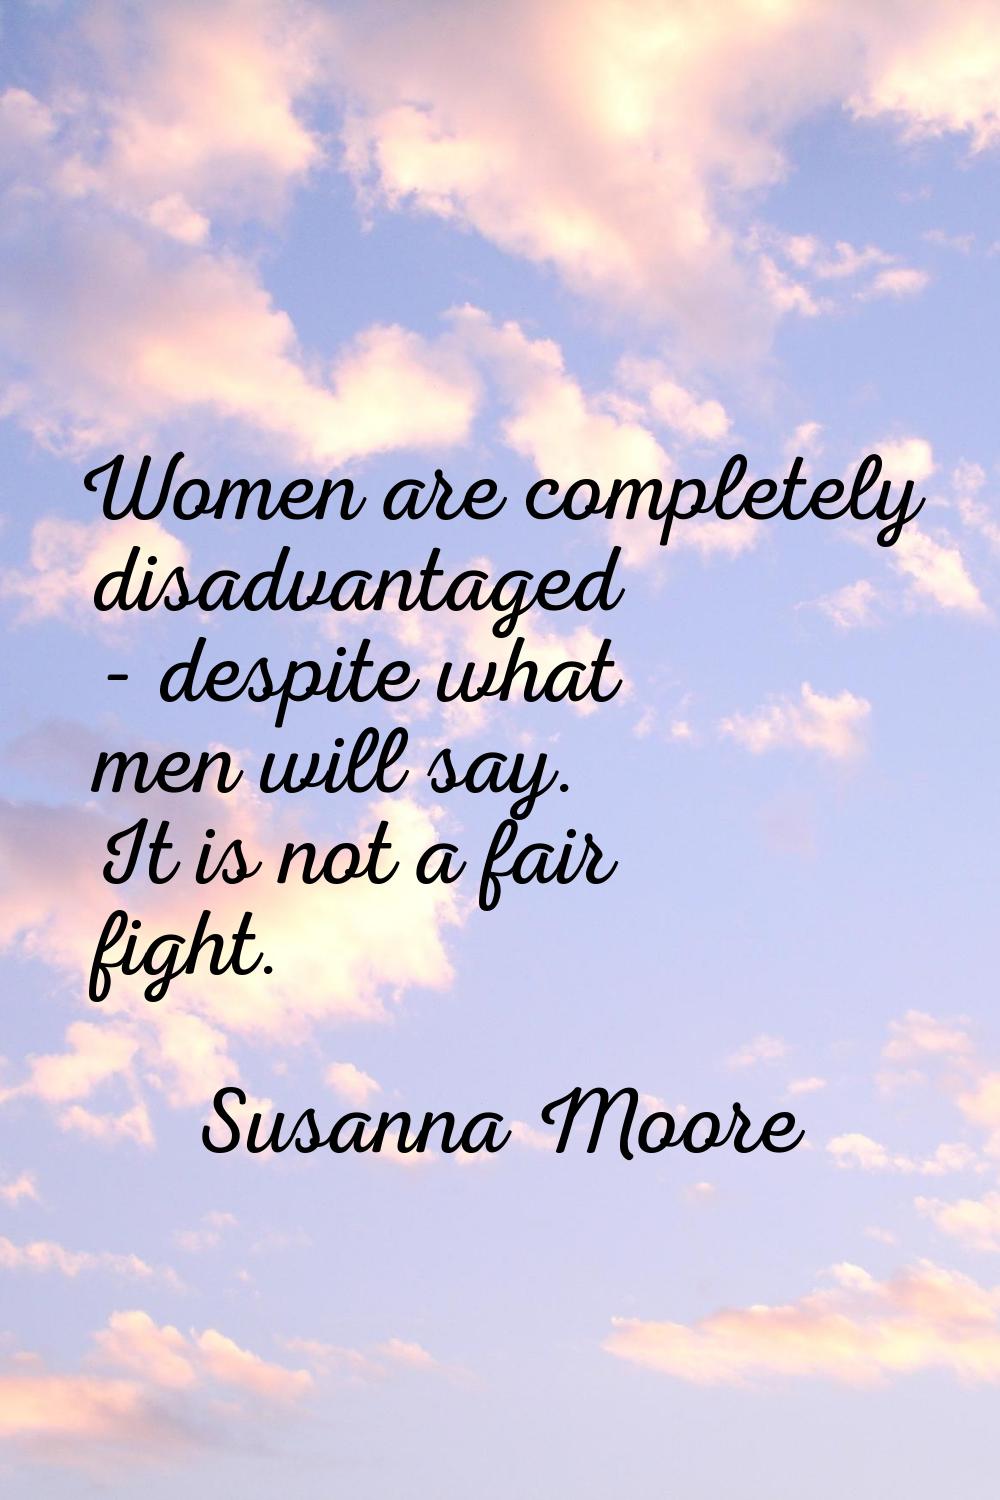 Women are completely disadvantaged - despite what men will say. It is not a fair fight.